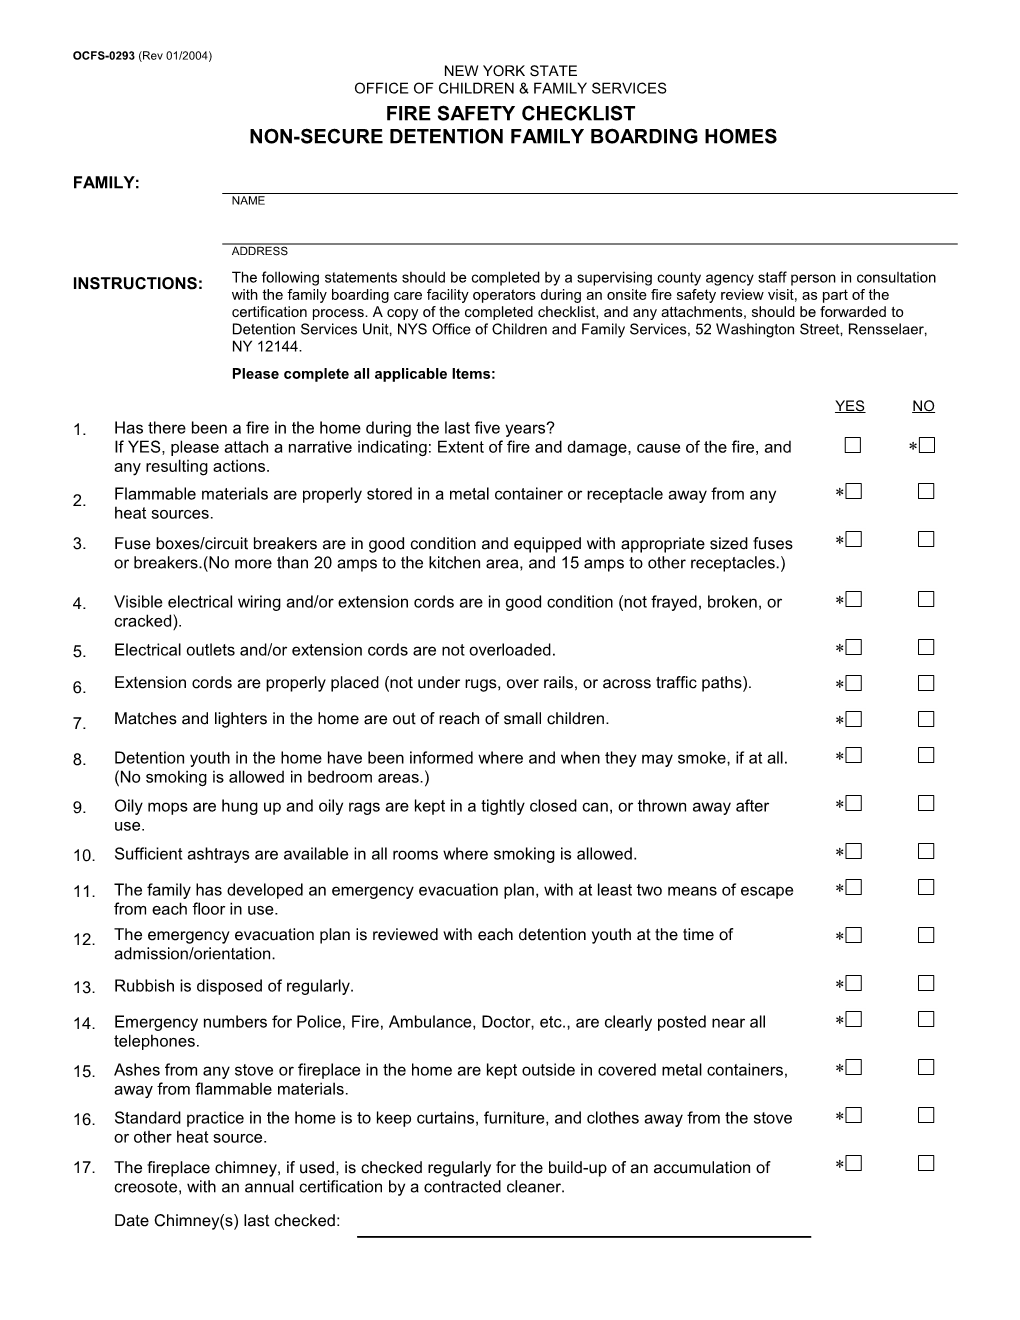 OCFS-0293 Fire Safety Checklist Non-Secure Detention Family Boarding Homes